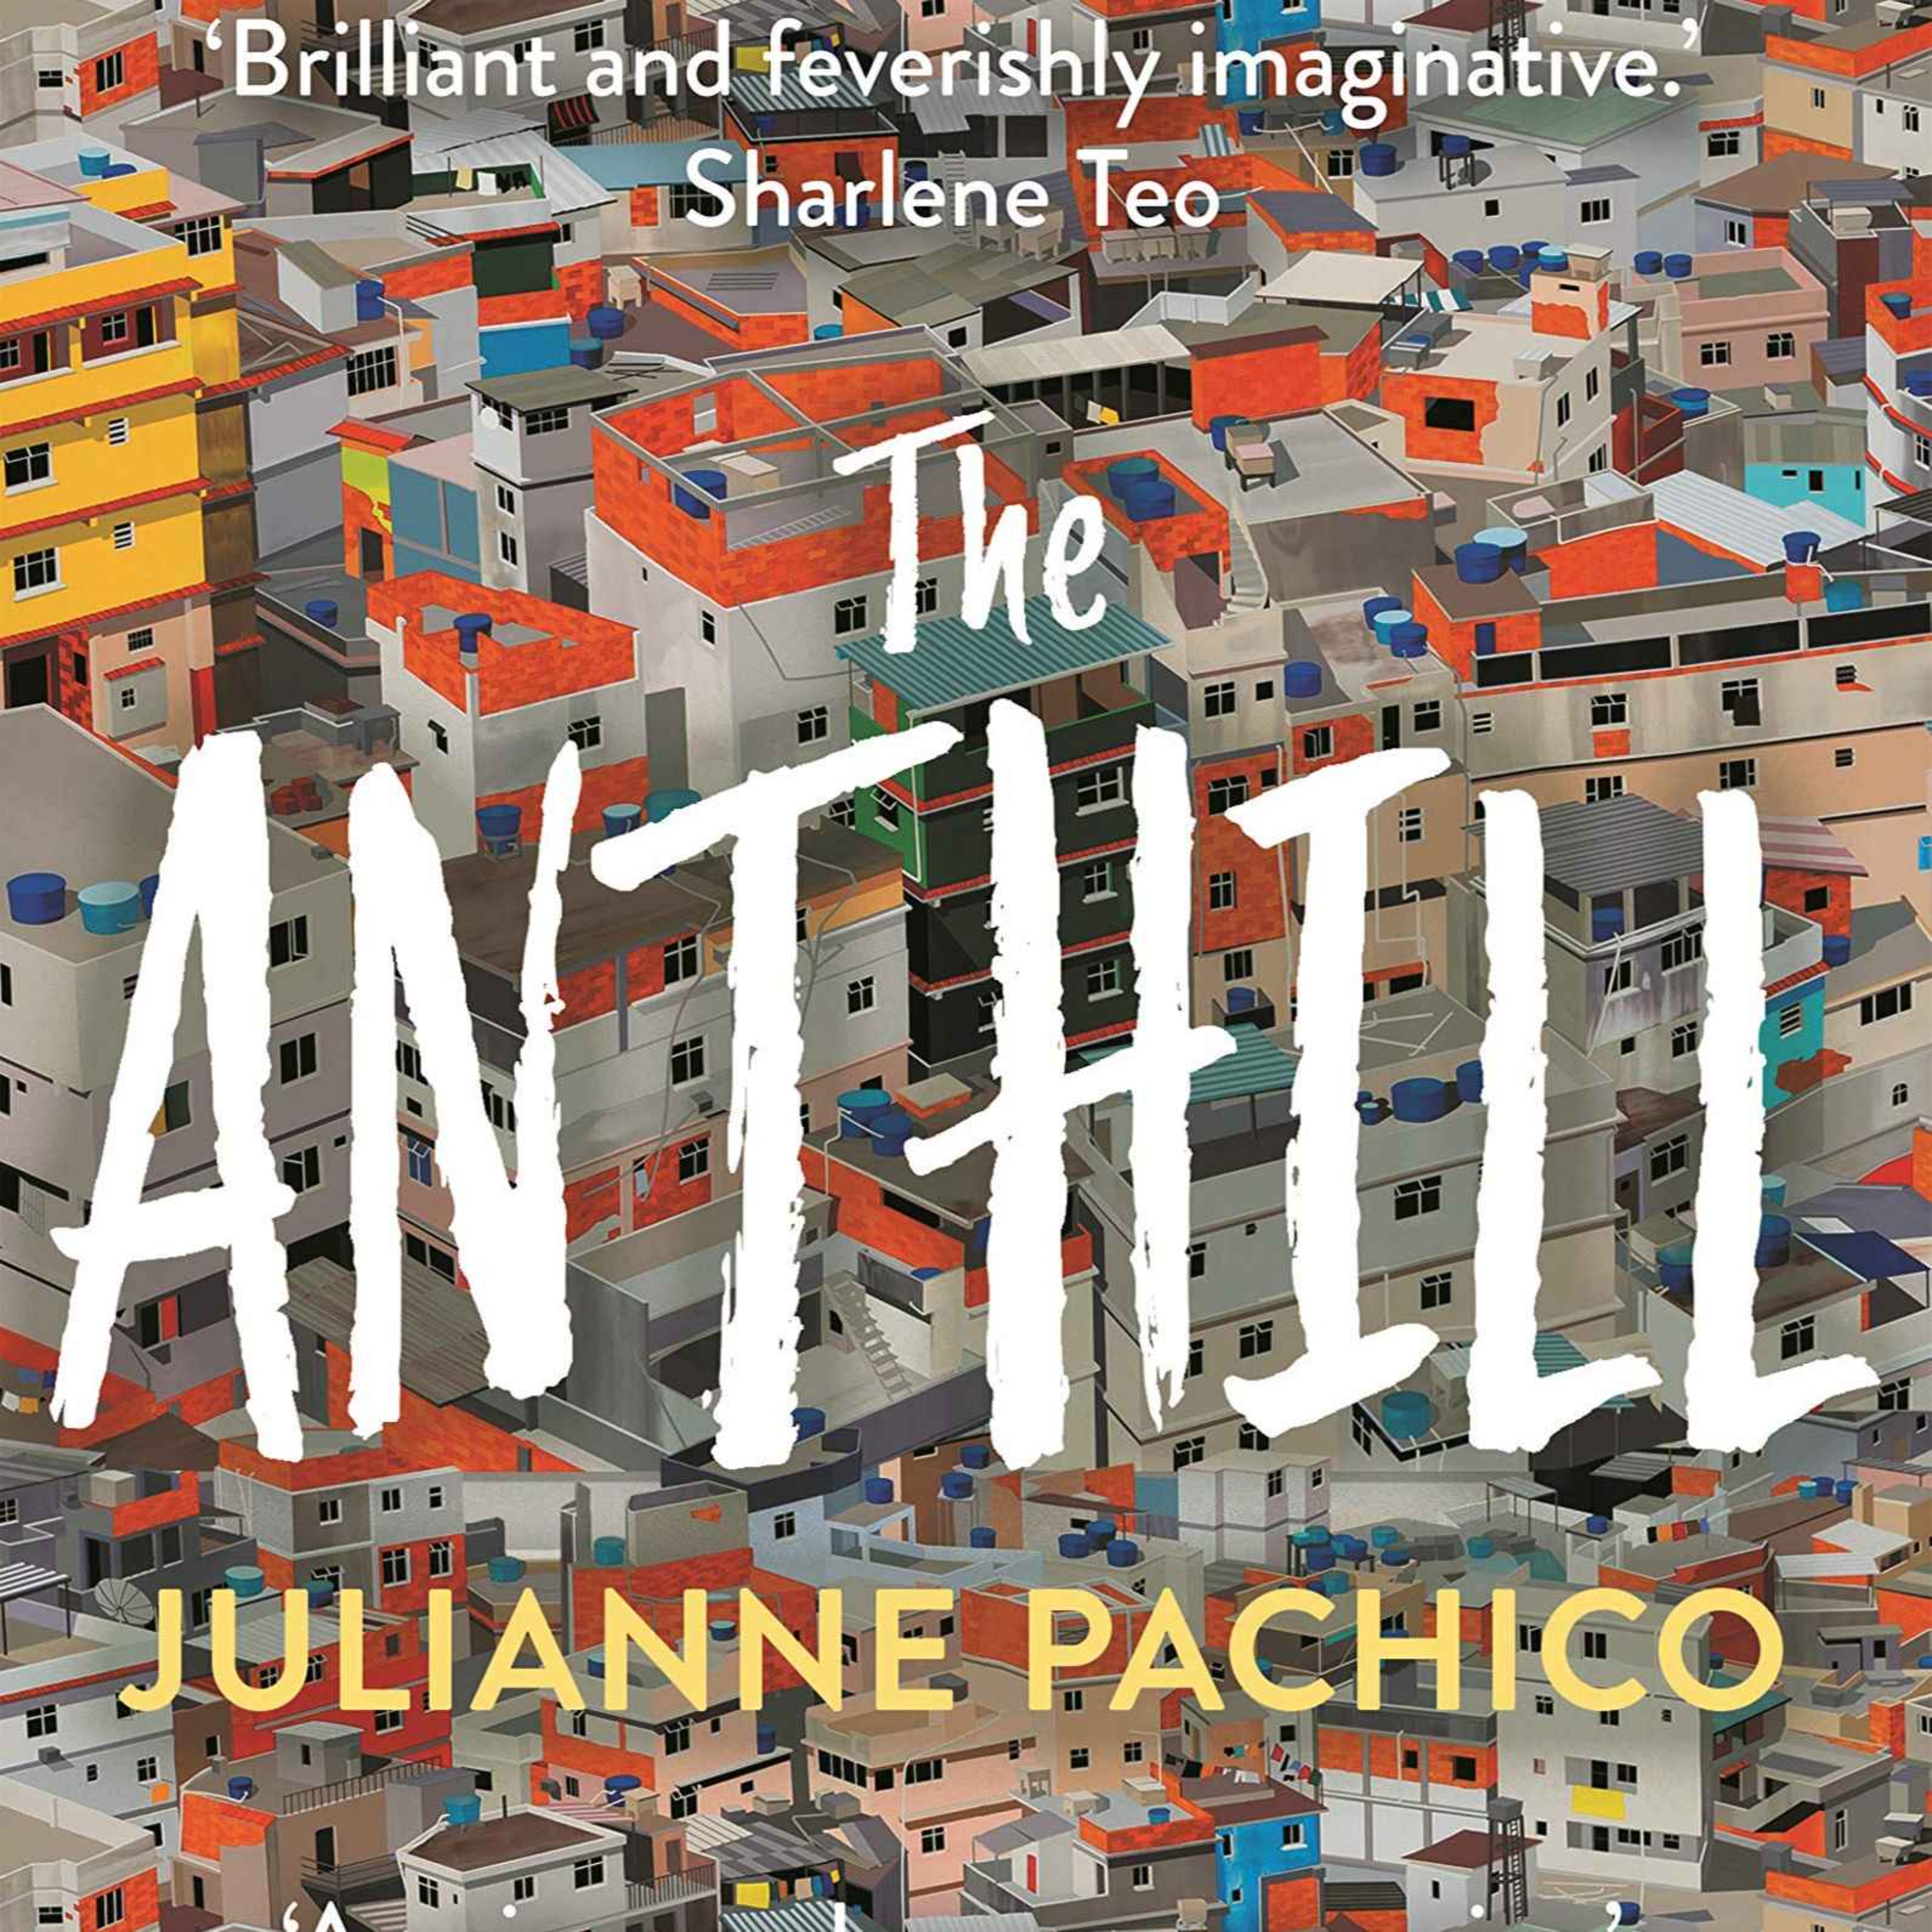 Little Atoms 715 - Julianne Pachico's The Anthill